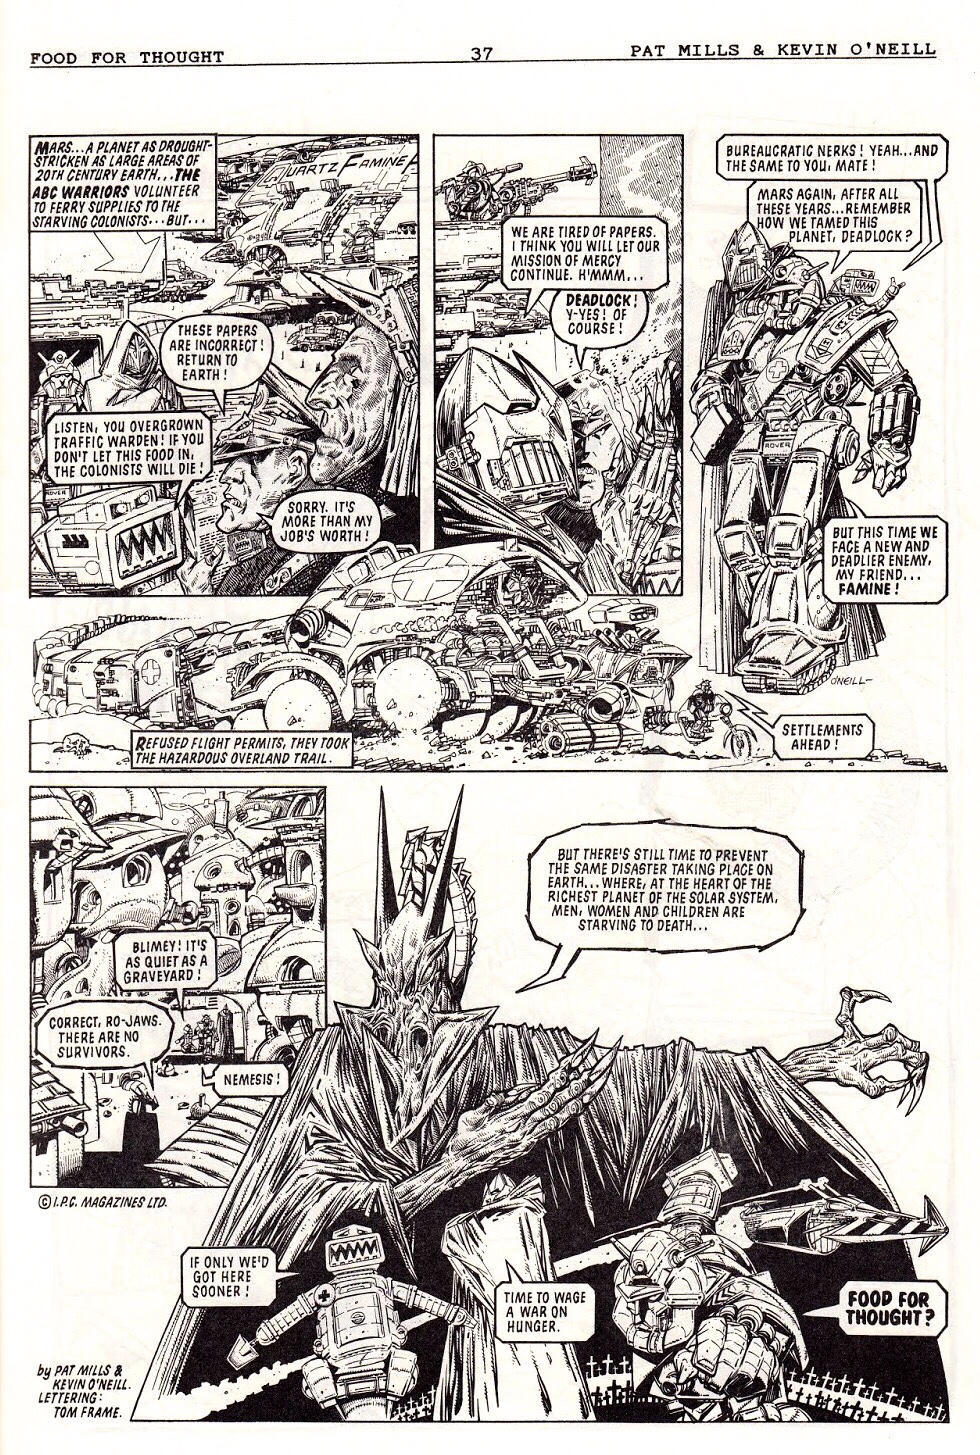 Food for Thought - strip by Pat Mills & Kevin O’Neill